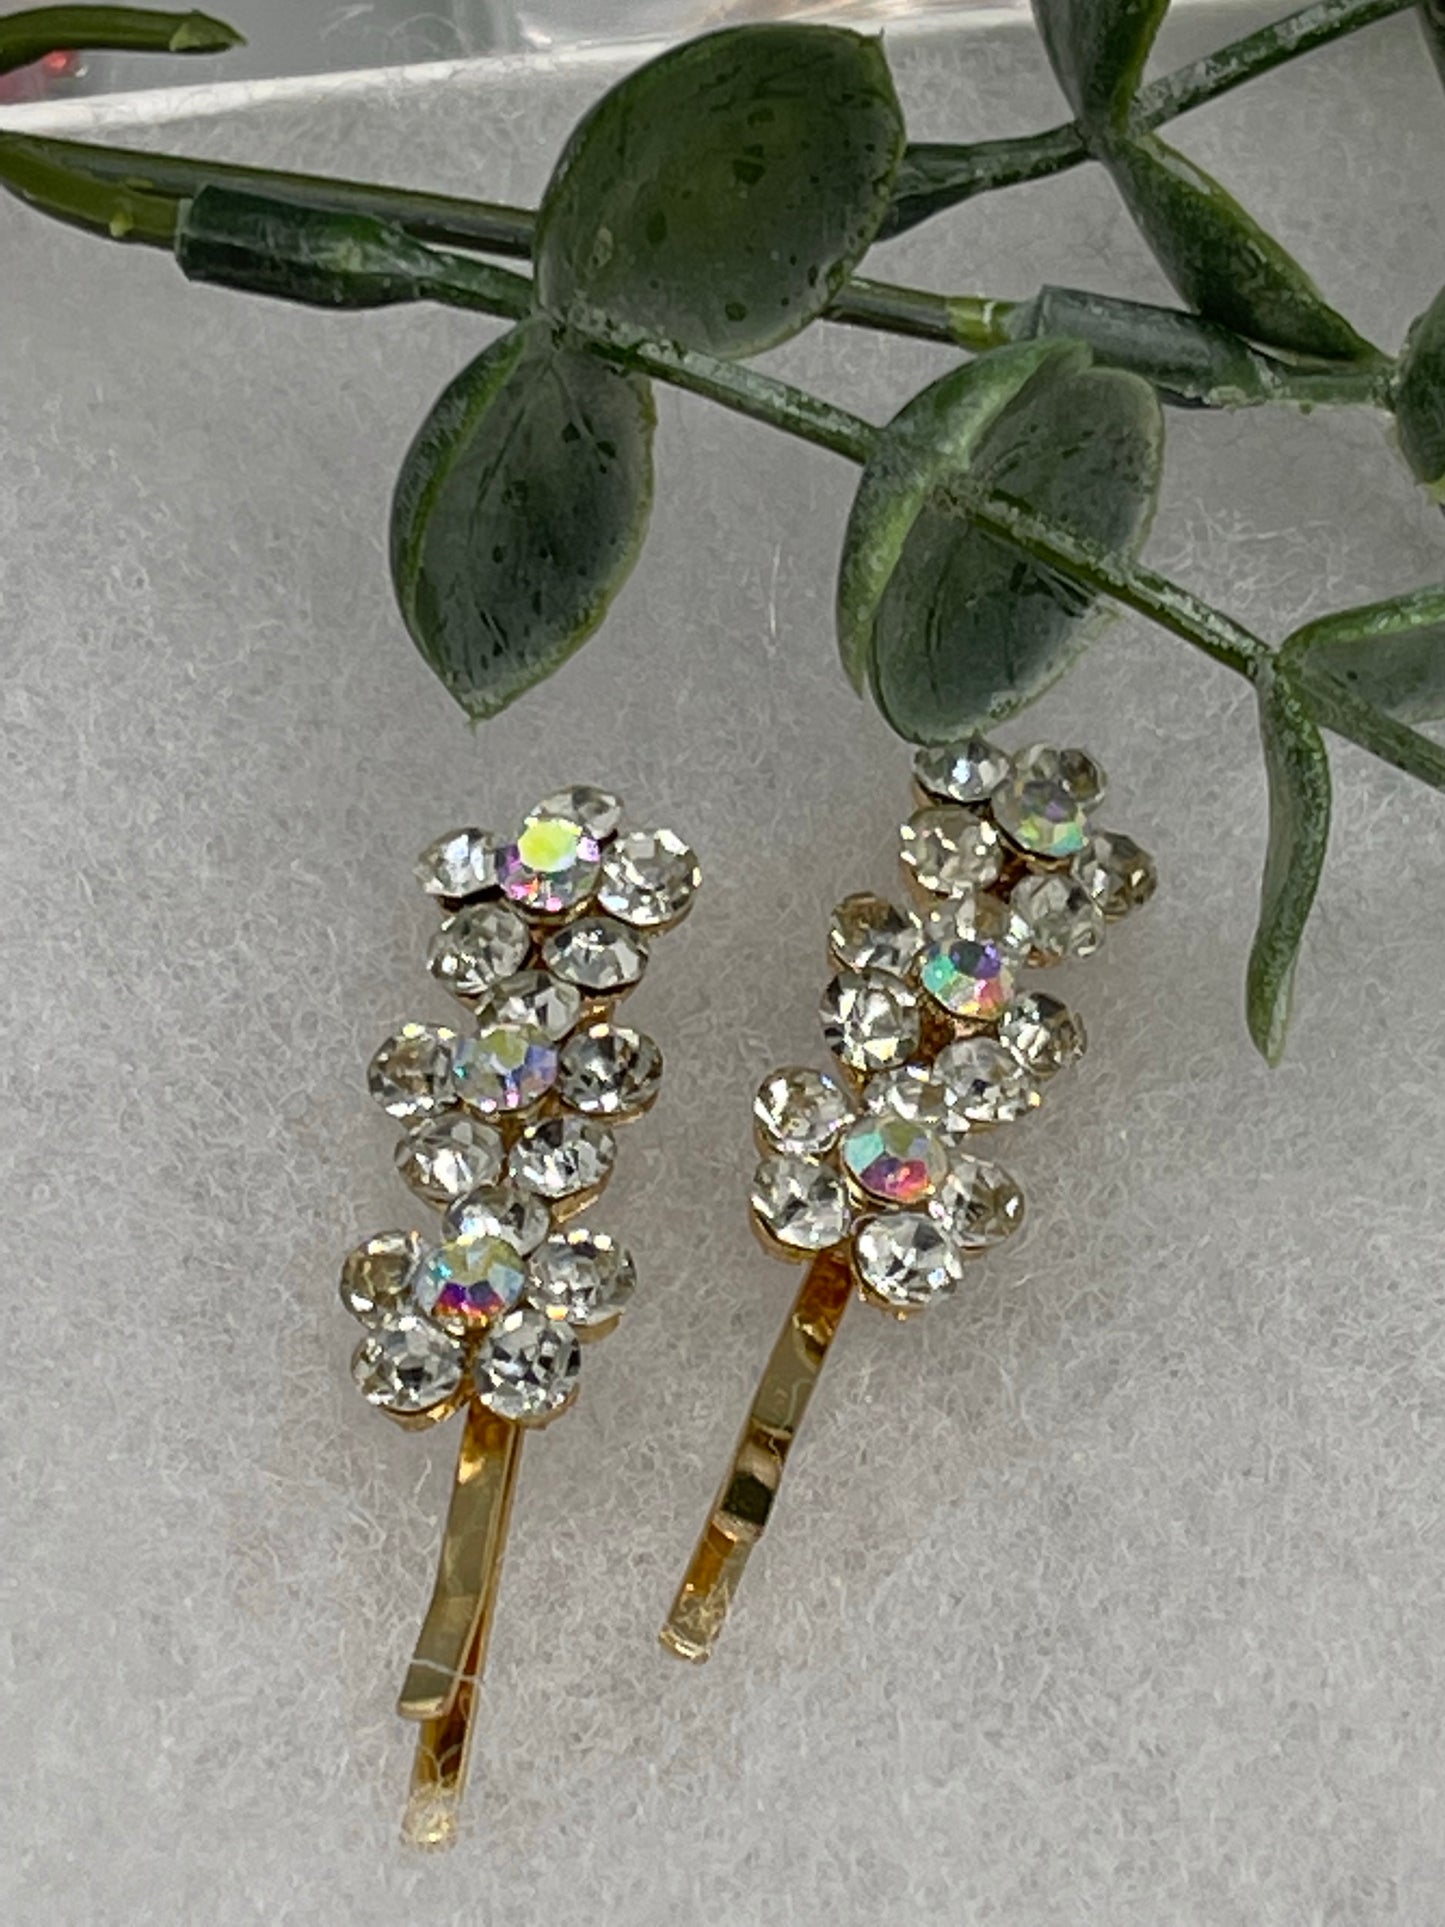 Iridescent Clear Crystal rhinestone flowers approximately 2.0” gold tone hair pins 2 pc set wedding bridal shower